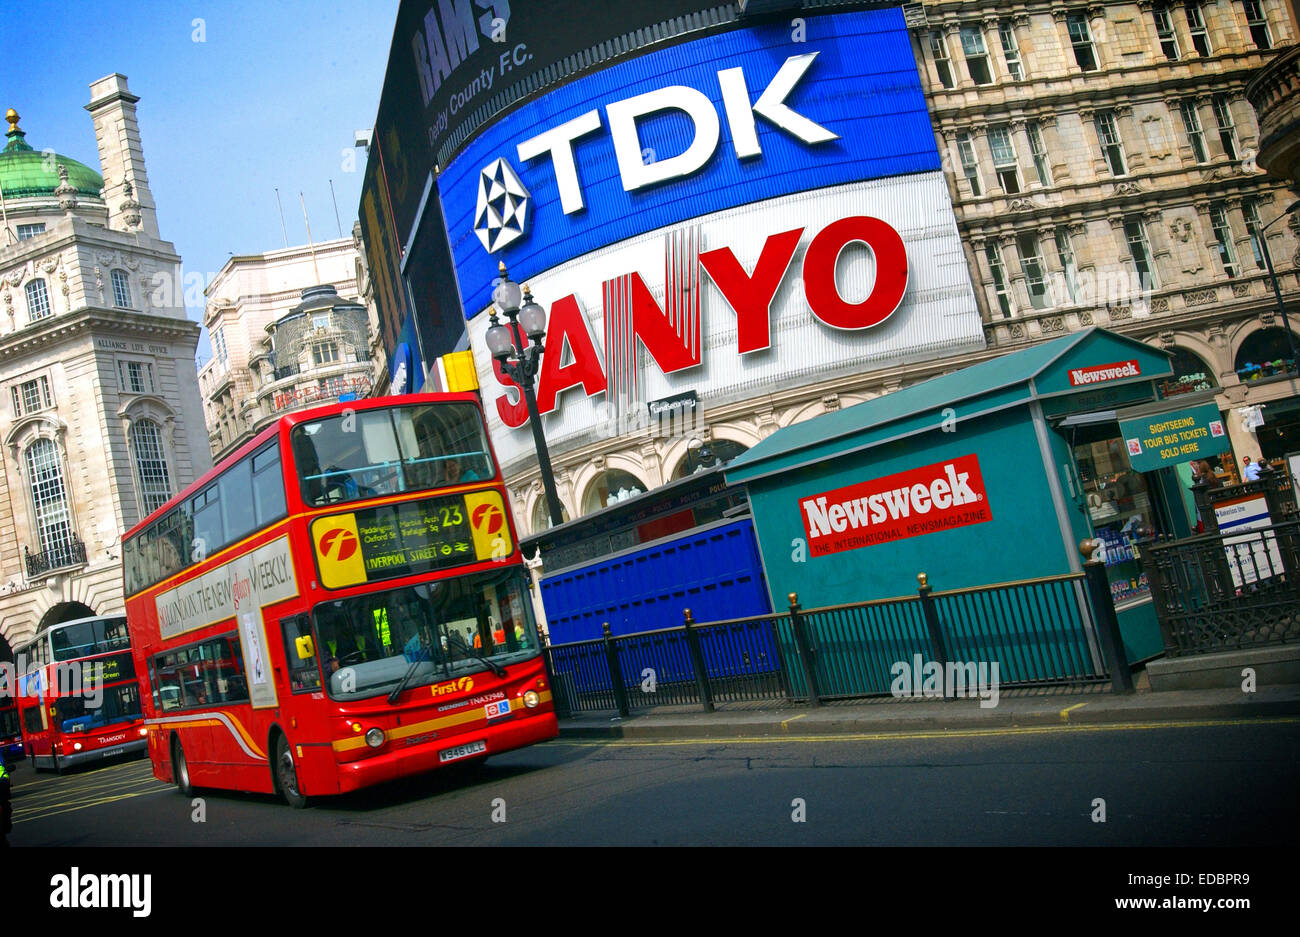 A buss traveling through central London. Stock Photo